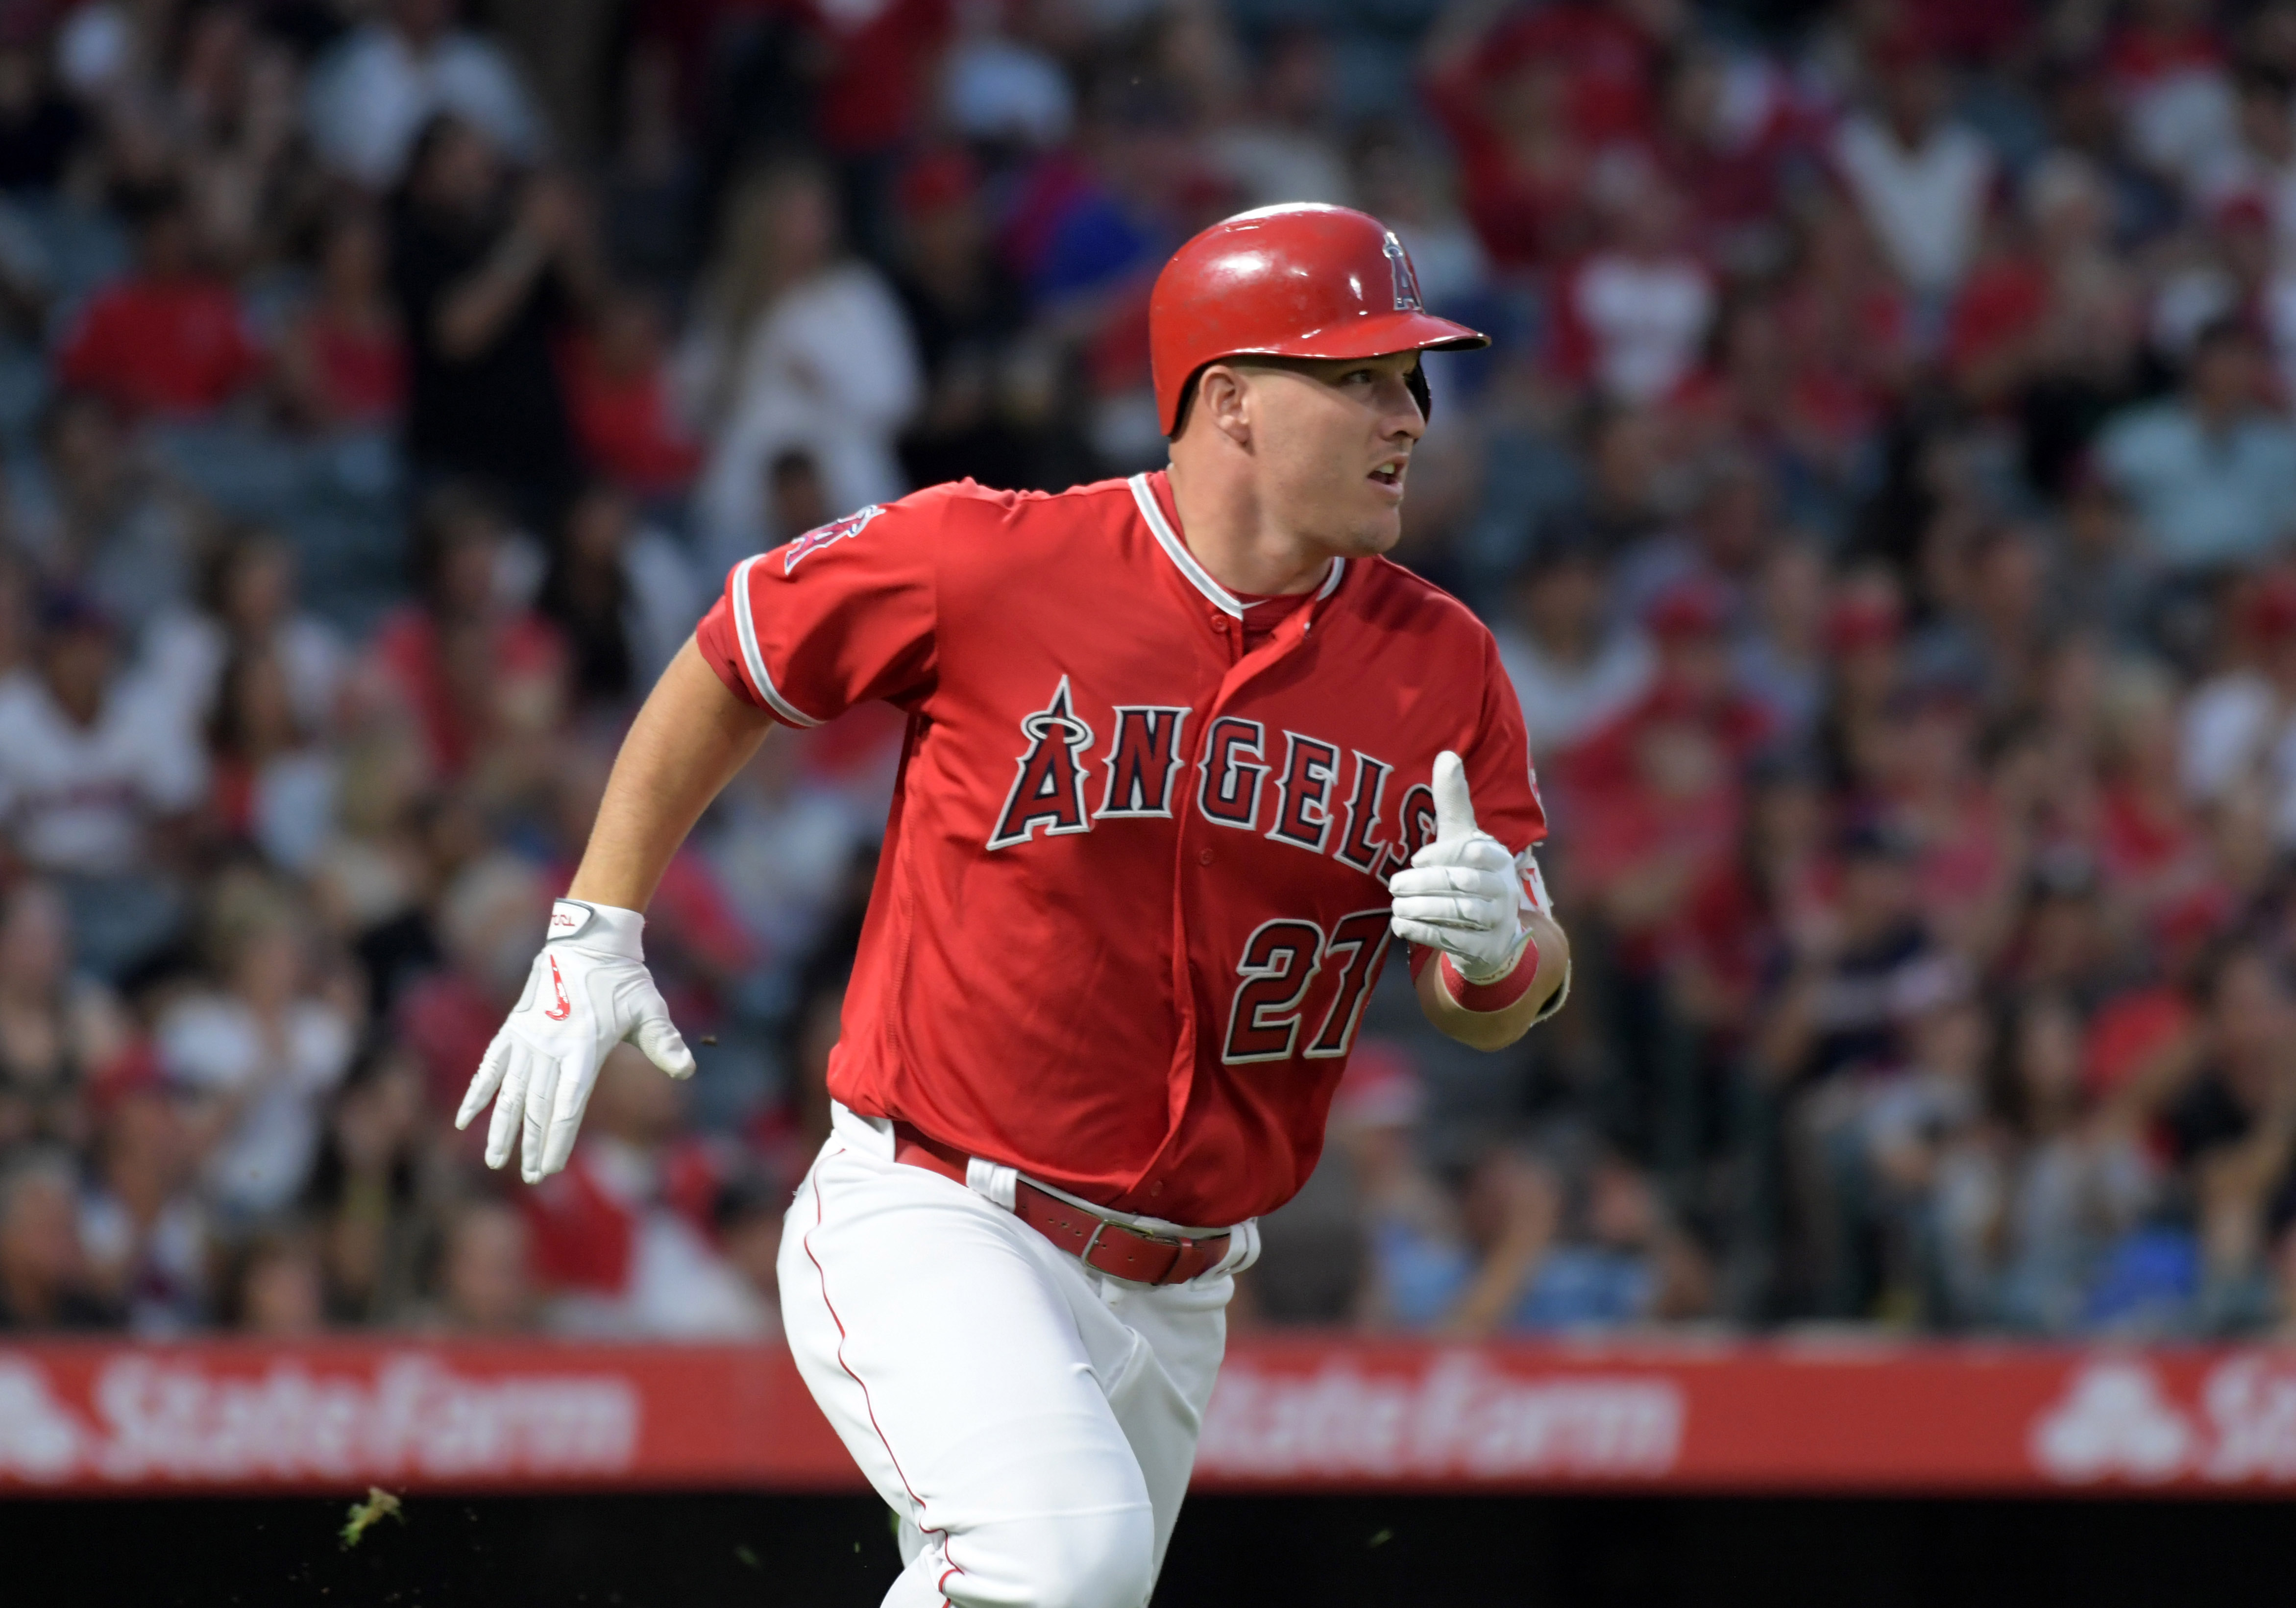 Valley News - Commentary: Trout and Harper Are the Same, But Different